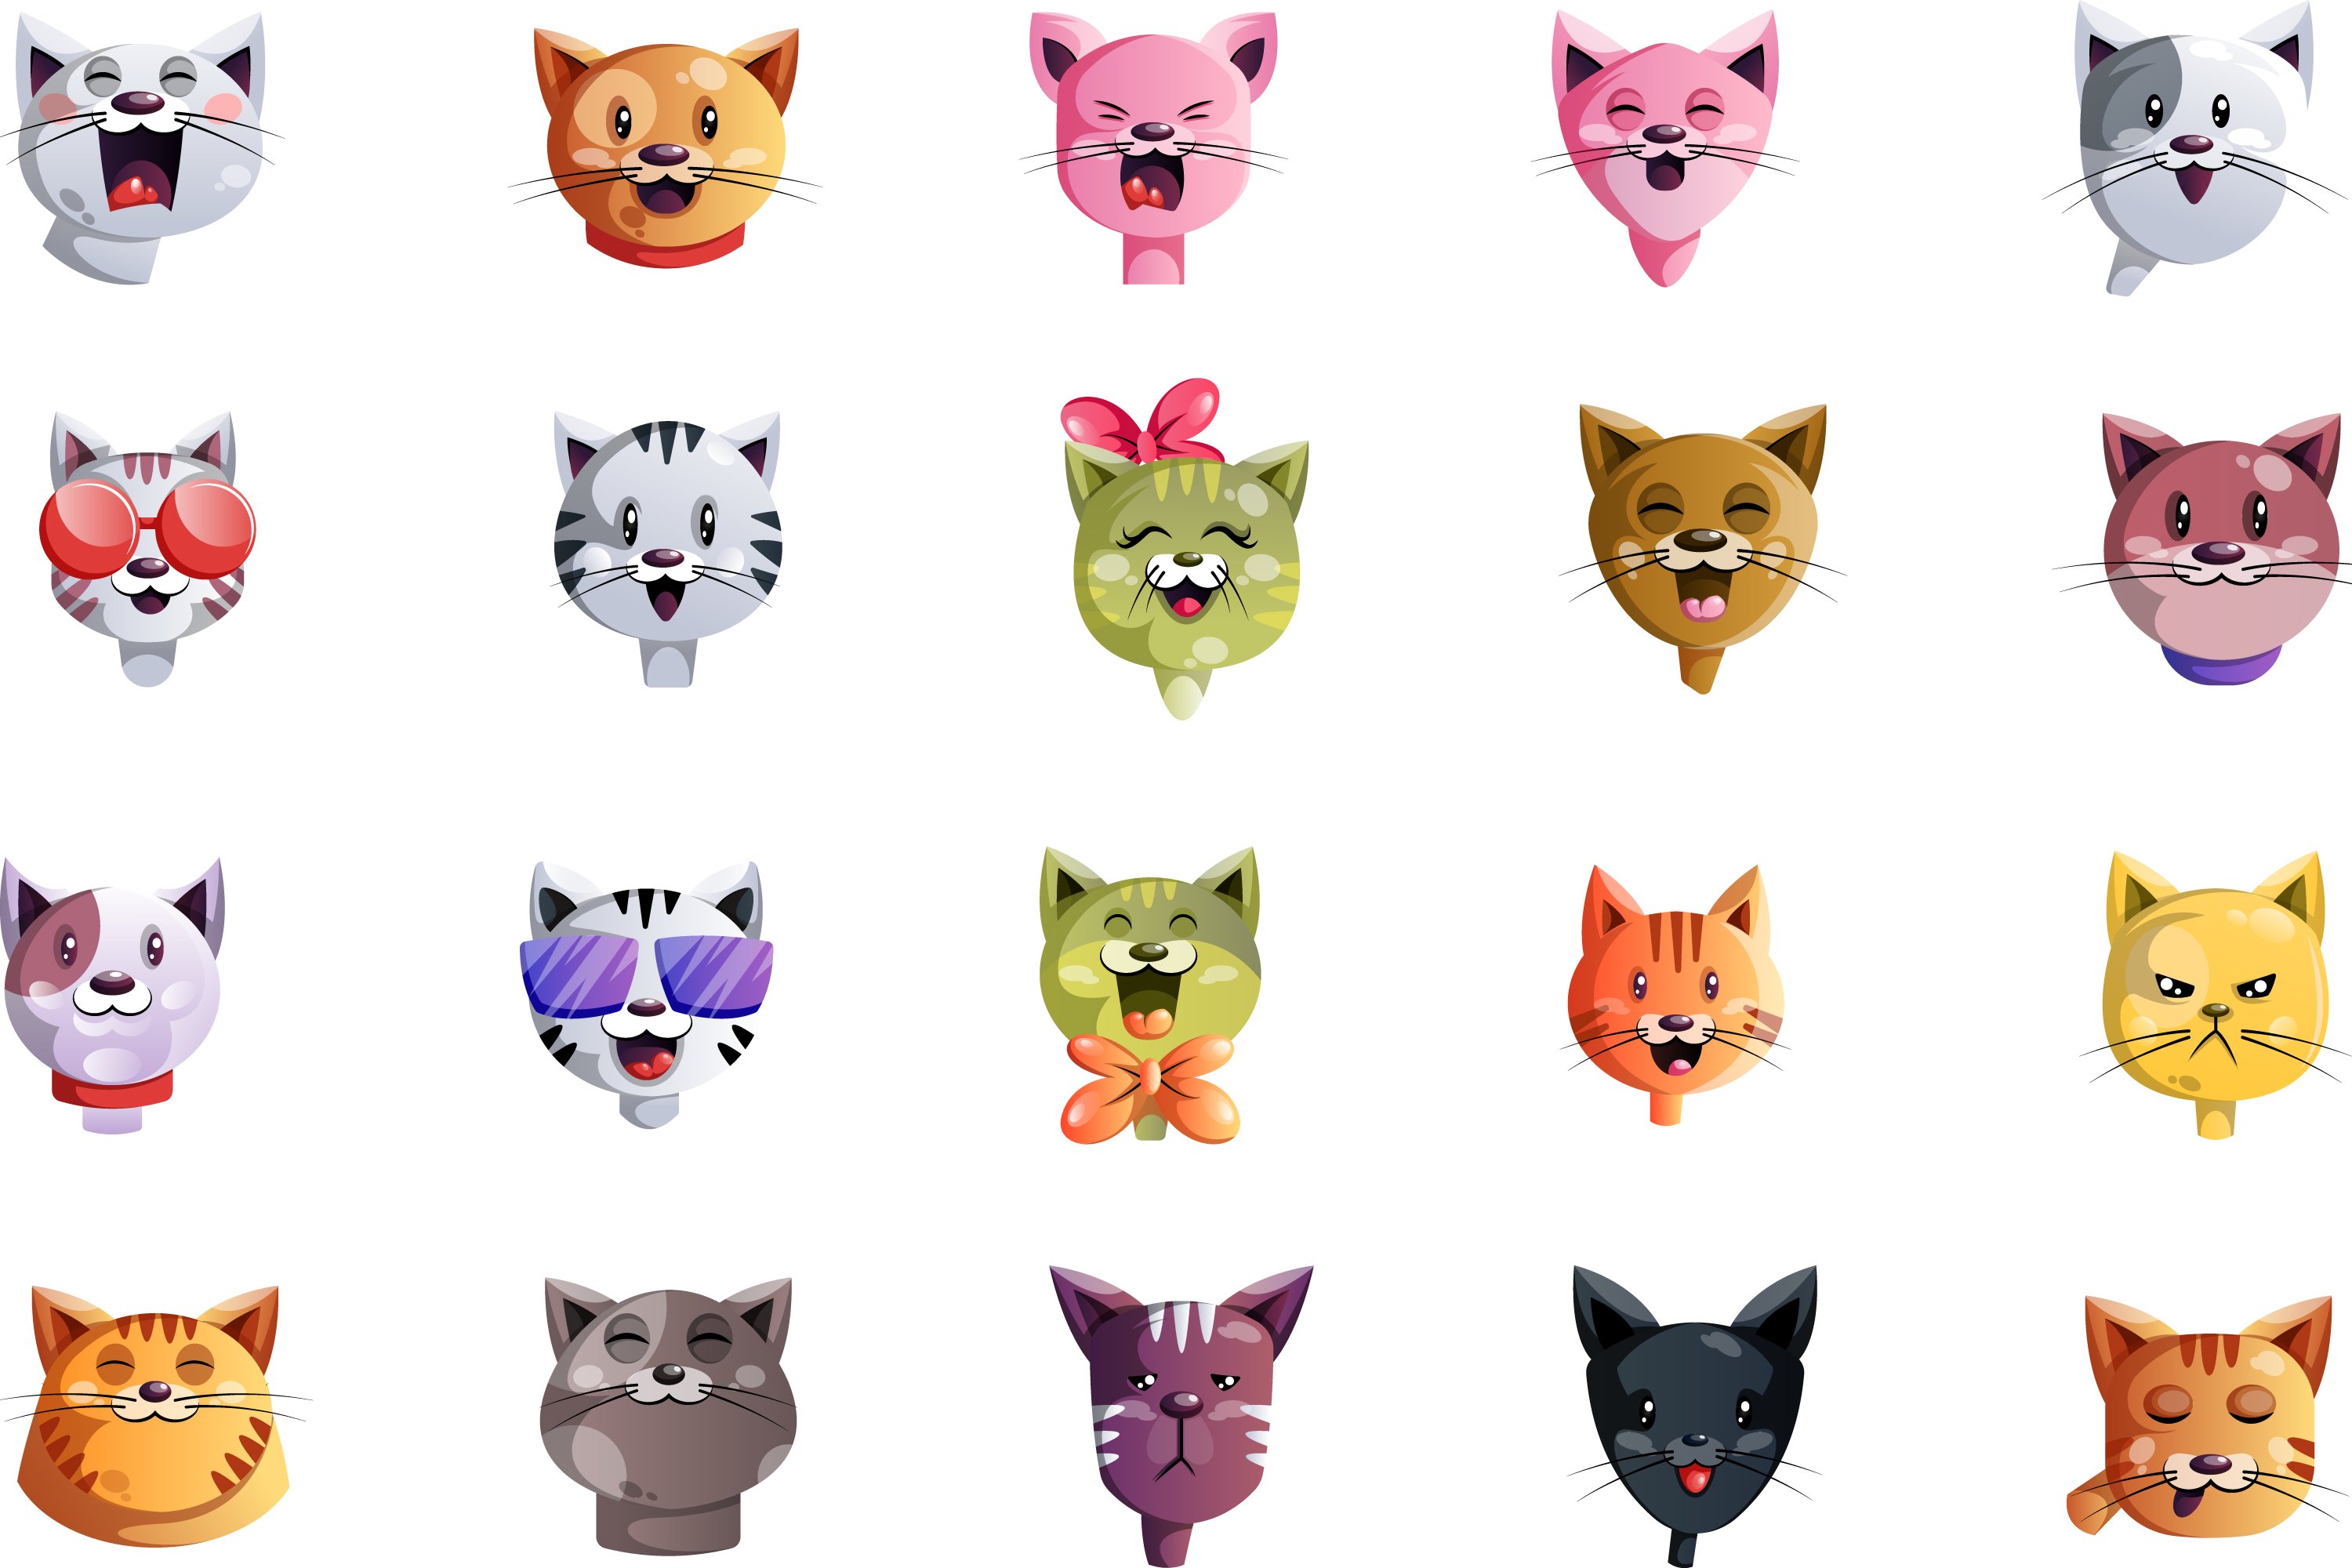 Multicolored faces of cats.